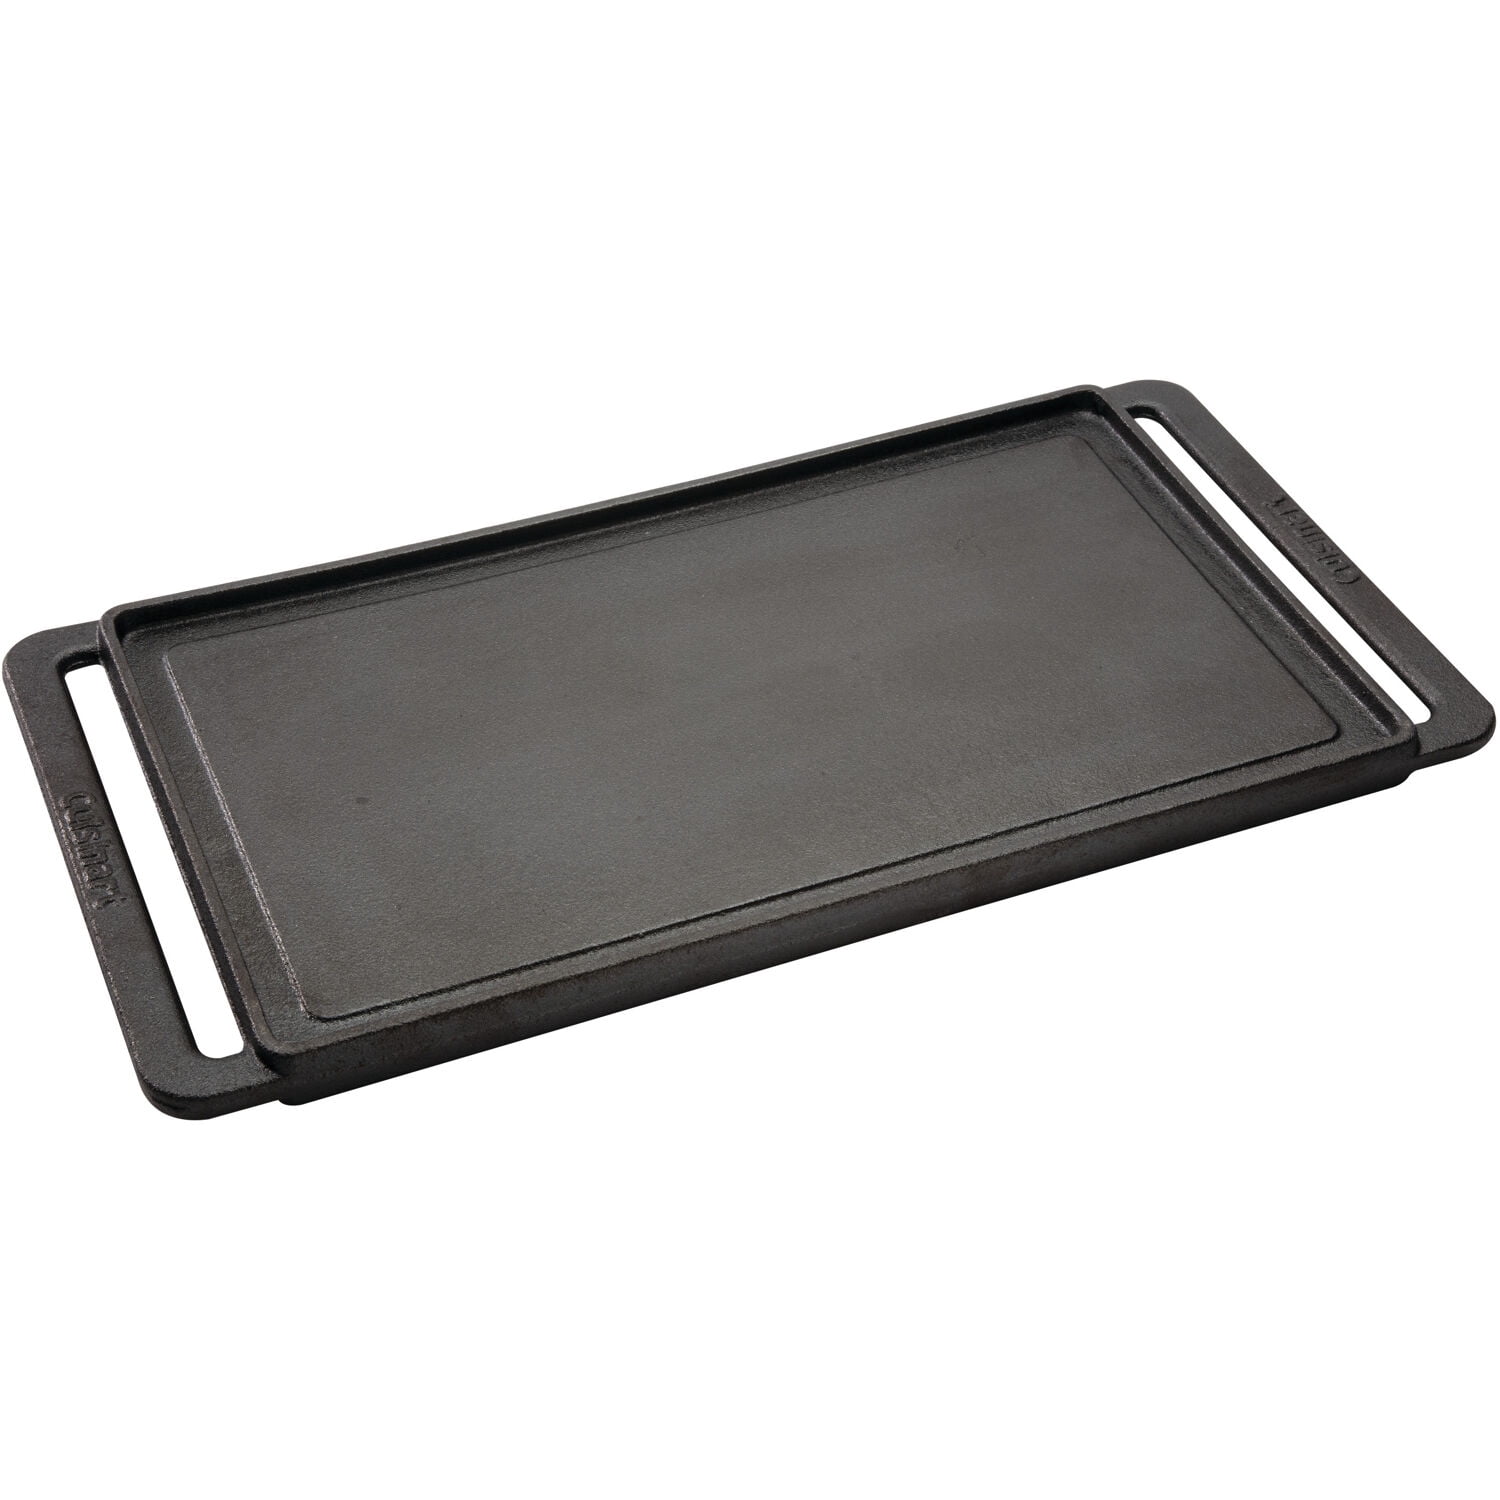 Cooking Concepts Grill Tray Pan Rectangle 13"x9" BBQ Camping Stove Smoker NEW 